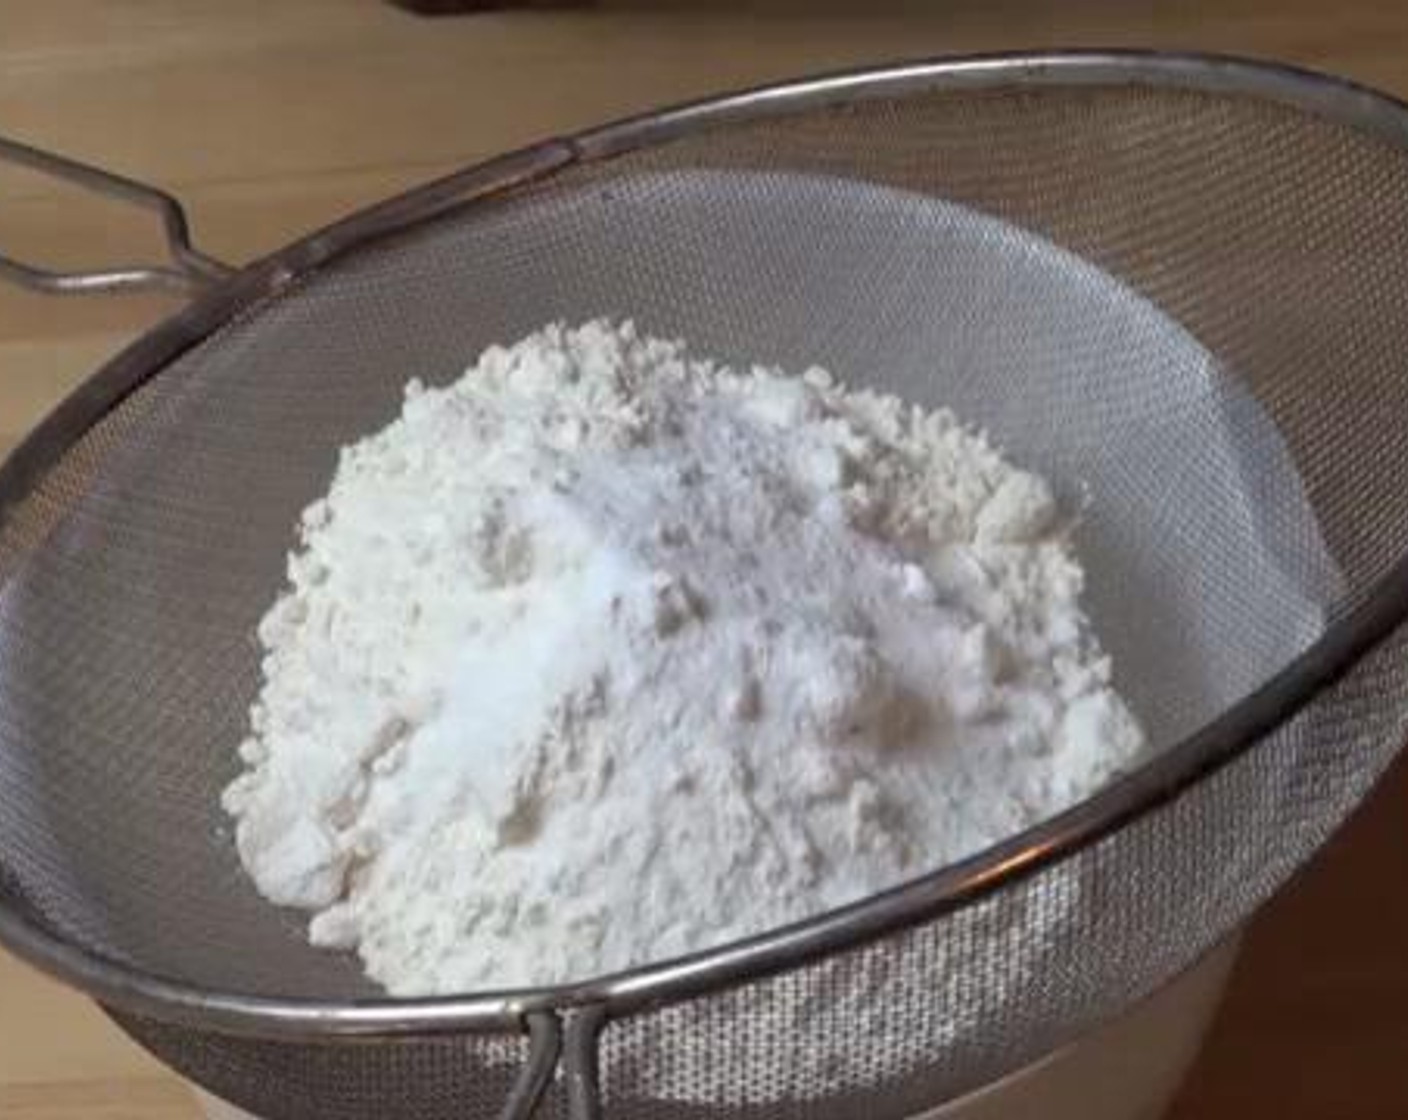 step 4 Into a mixing bowl, sift in the All-Purpose Flour (2 cups), Baking Powder (1 tsp), Salt (1 tsp), and Baking Soda (1/2 tsp)